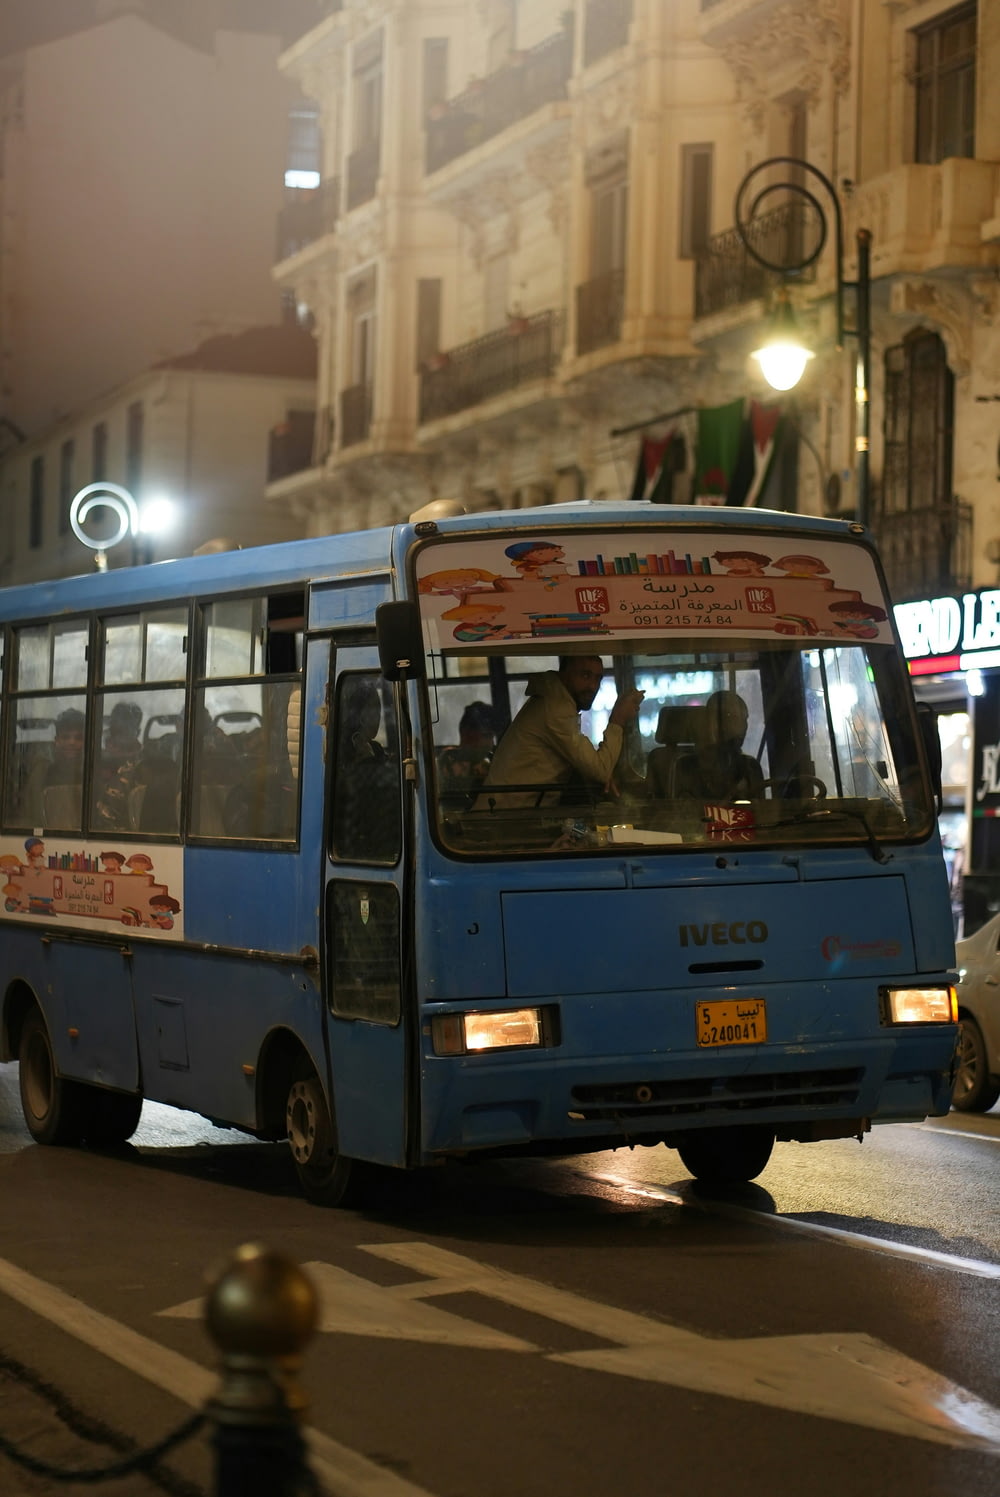 a blue bus driving down a street next to tall buildings